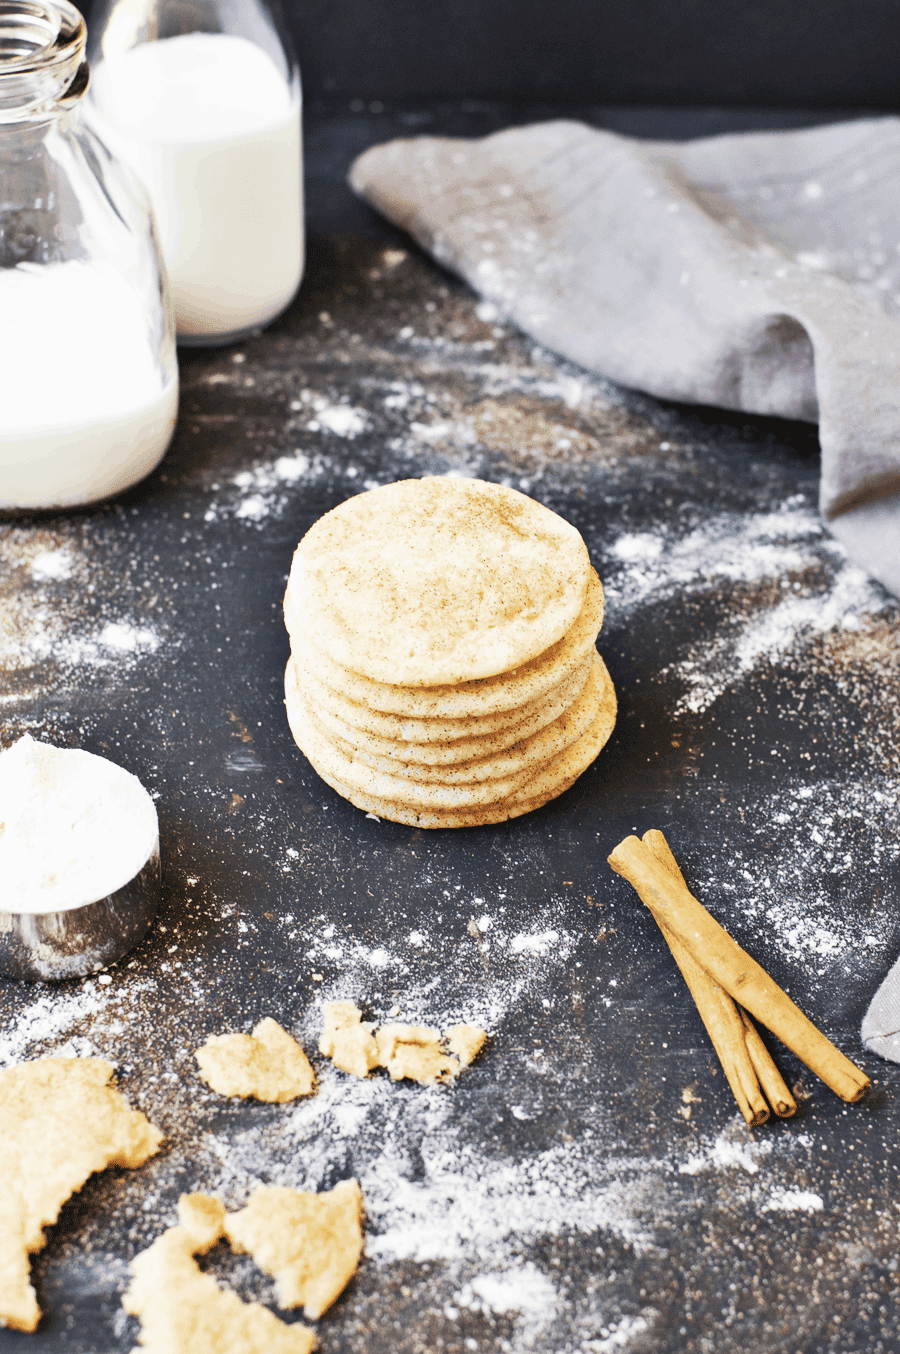 The Best Snickerdoodle Recipe in the World | how to make snickerdoodles, homemade snickerdoodles, homemade snickerdoodle recipe, from scratch cookie recipes, easy cookie recipes, the best cookie recipes, snickerdoodle recipe ideas || The Butter Half via @thebutterhalf